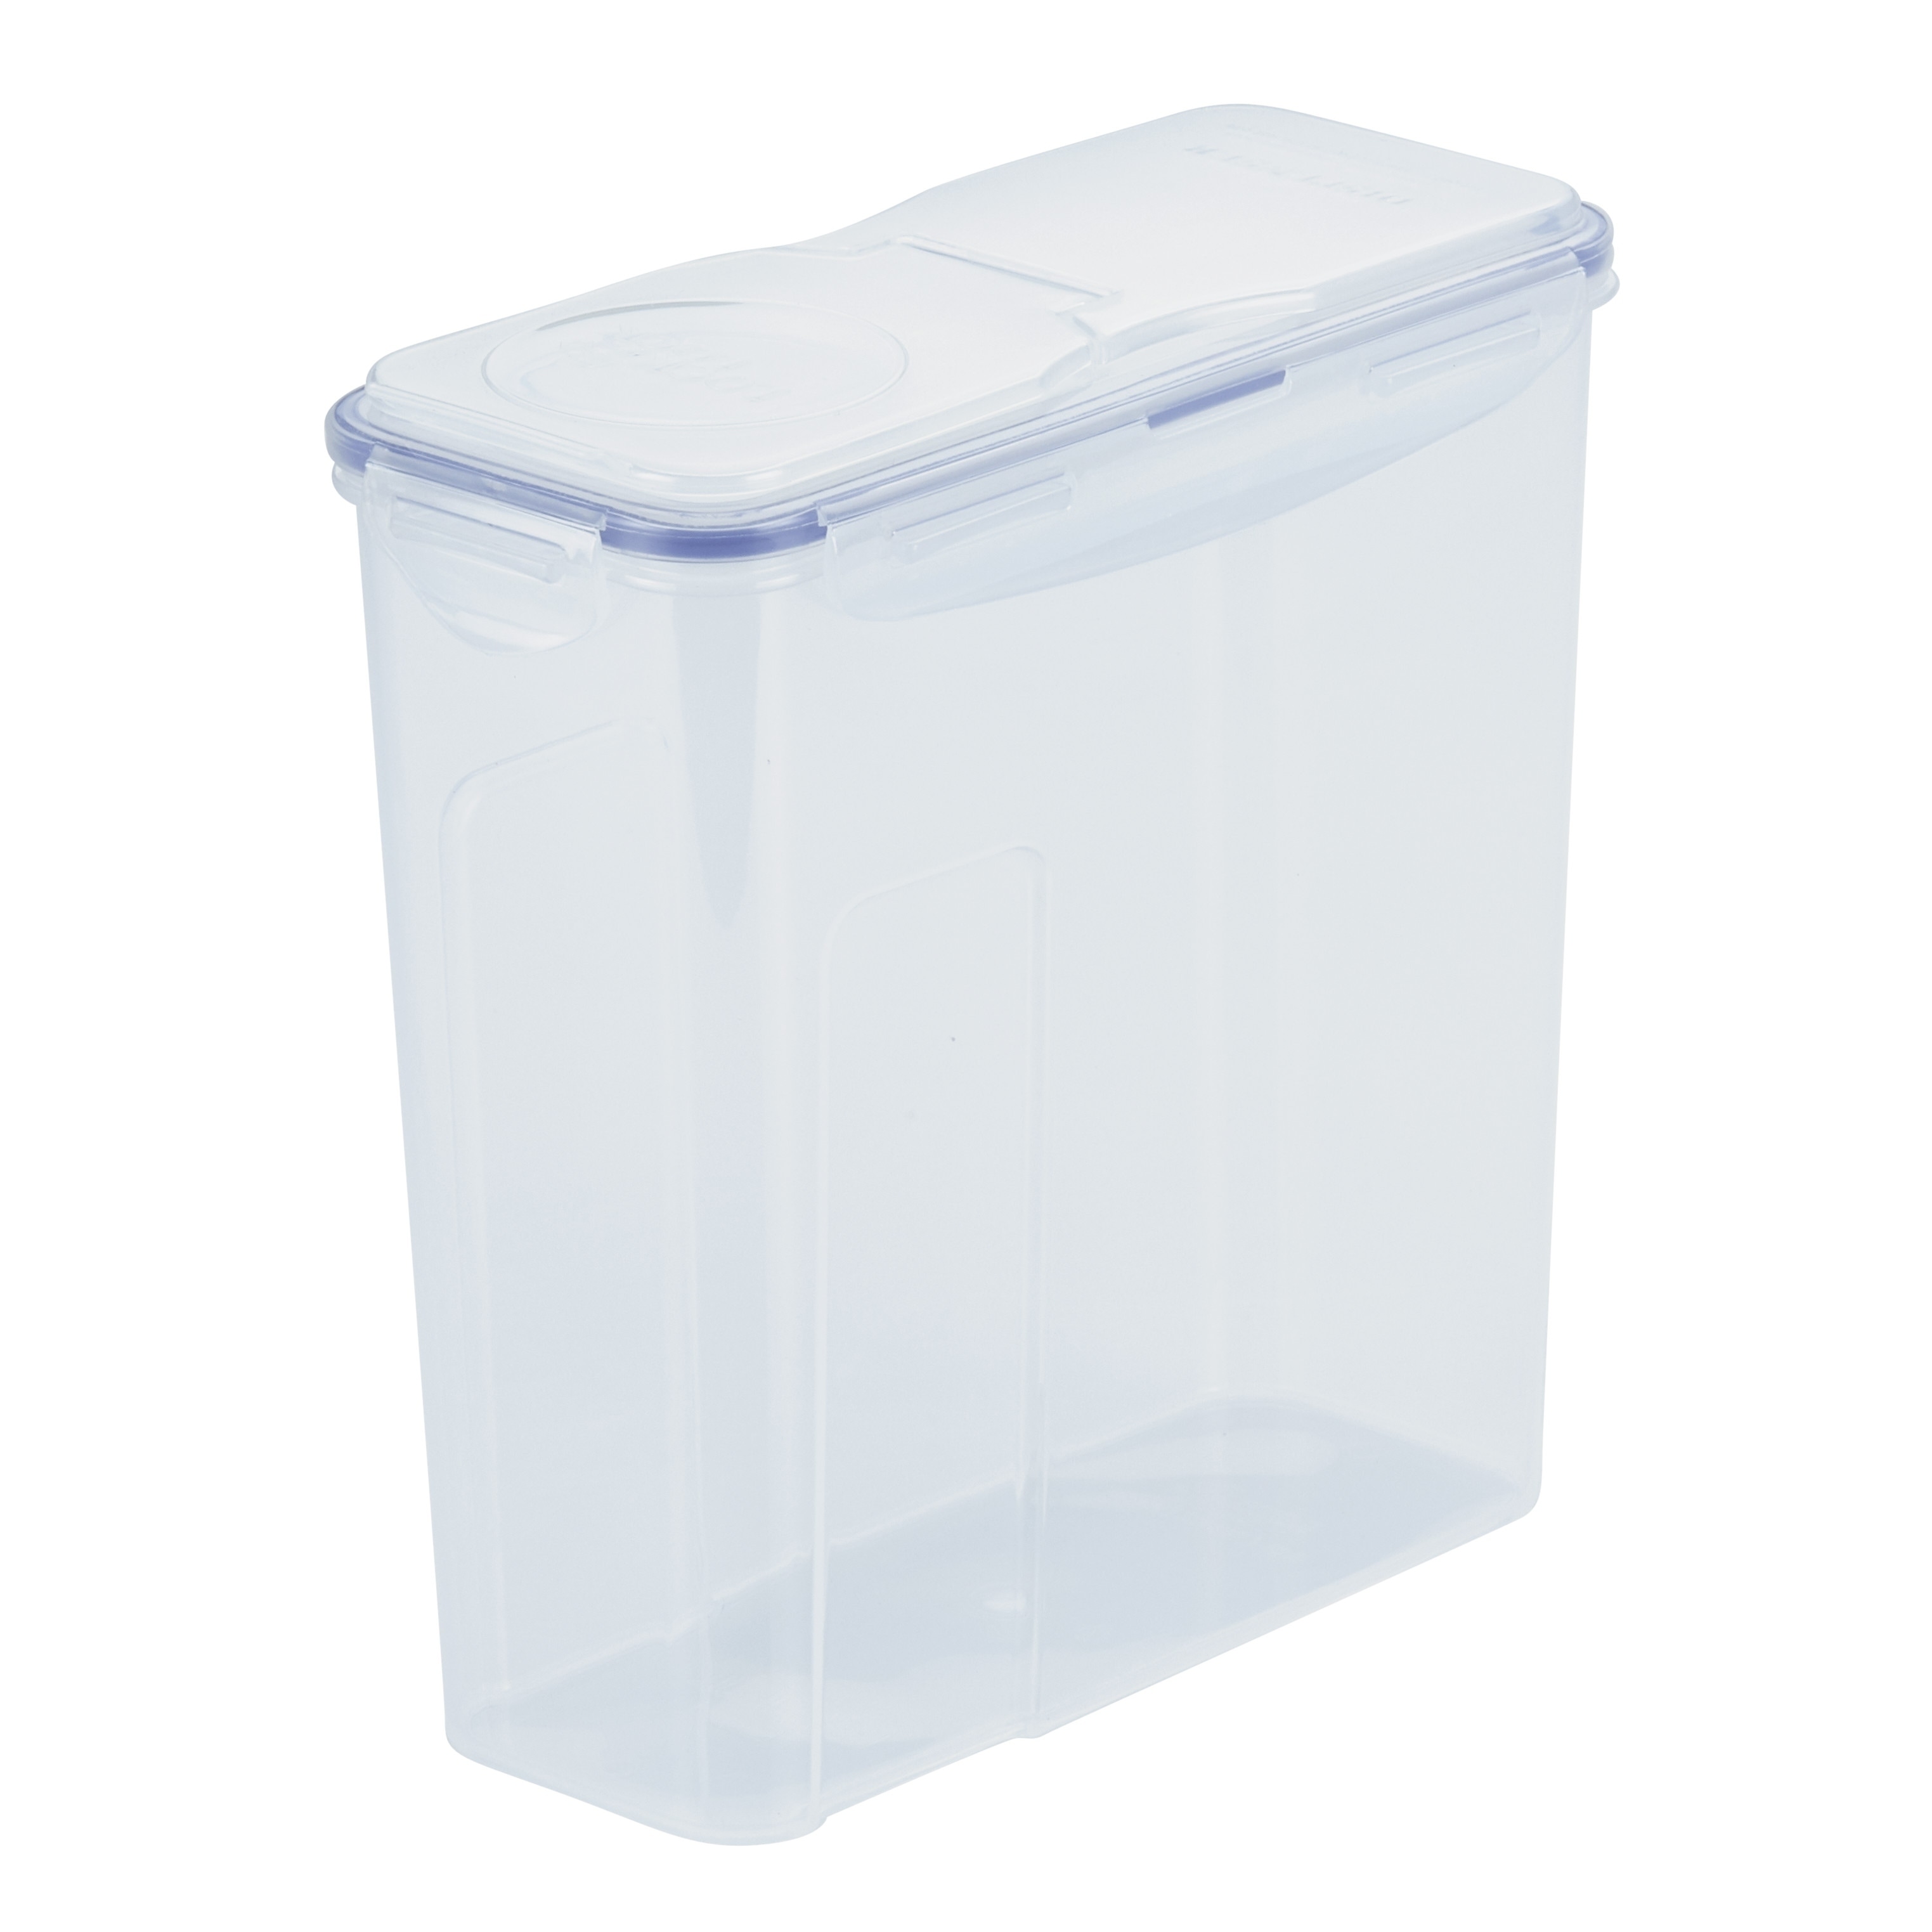 https://ak1.ostkcdn.com/images/products/29013370/Easy-Essentials-Pantry-Cereal-Storage-Container-with-Flip-Lid-16.5C-78c08b97-d0e1-485d-9d61-6a823a5e1c90.jpg